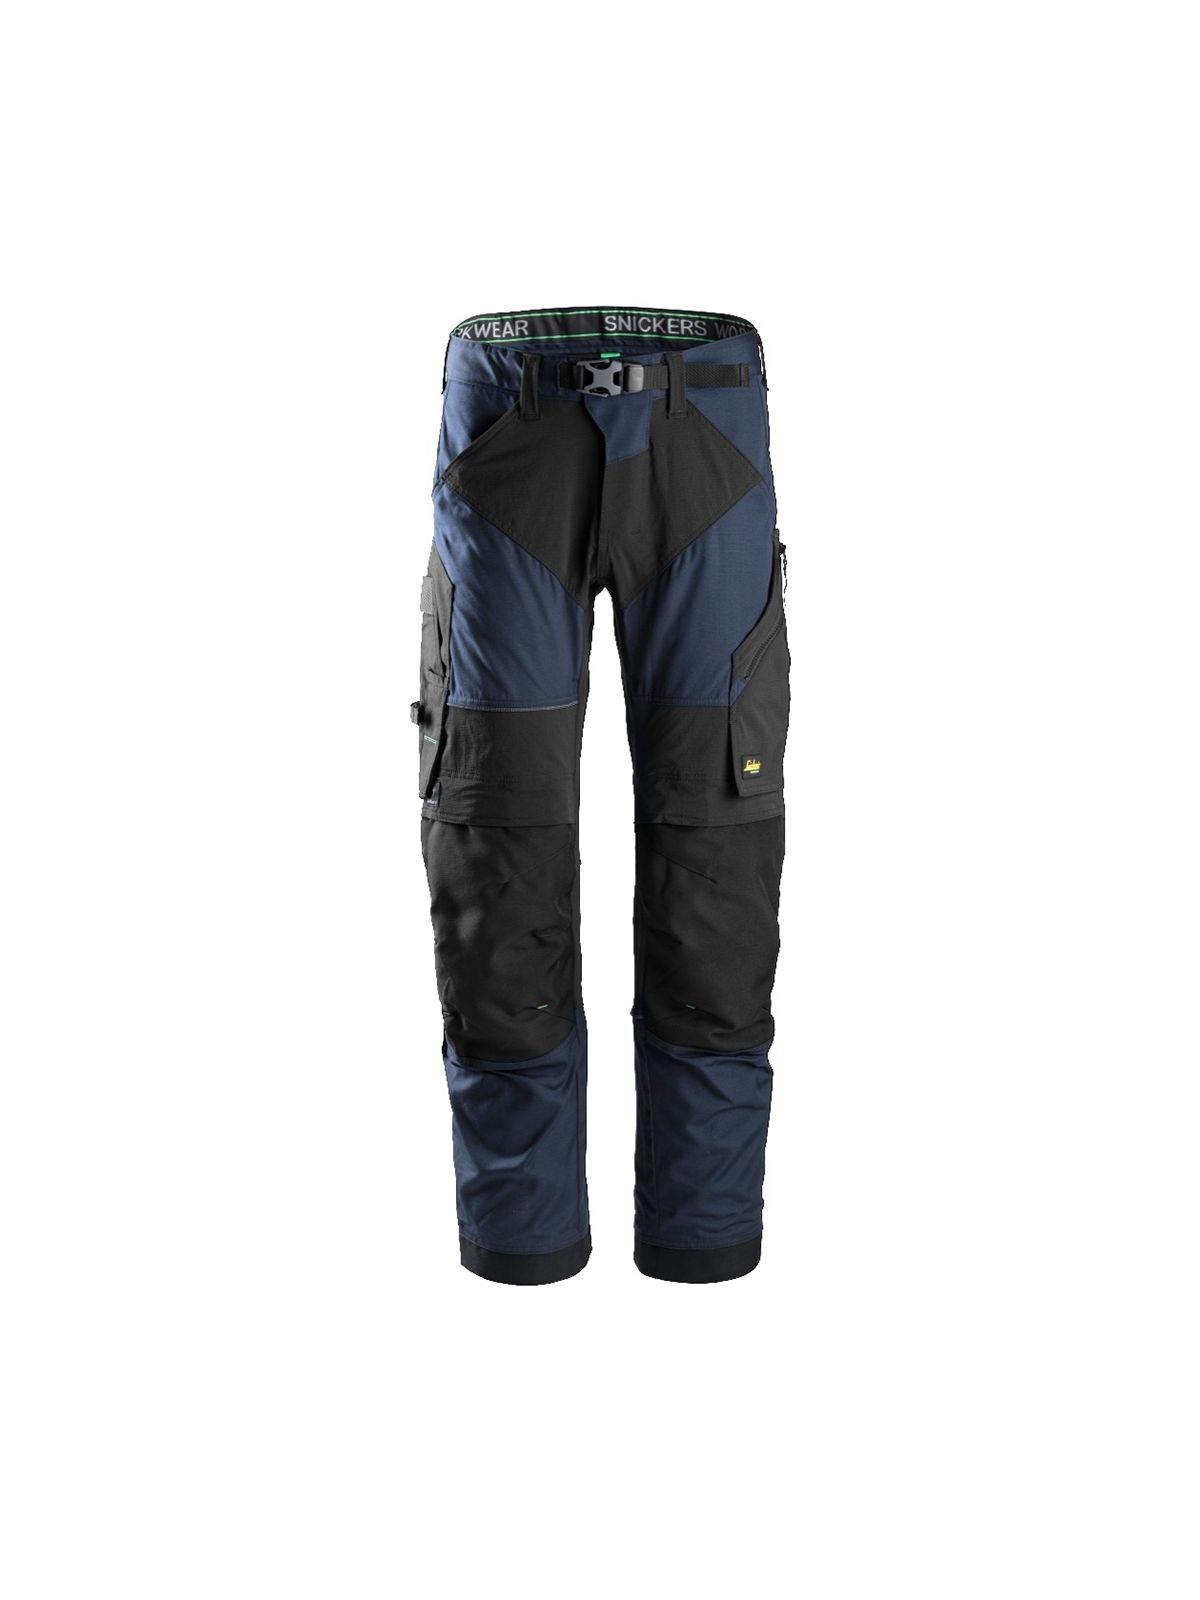 Work Trousers+ Snickers 6903 Navy Camouflage Camouflage FlexiWork 